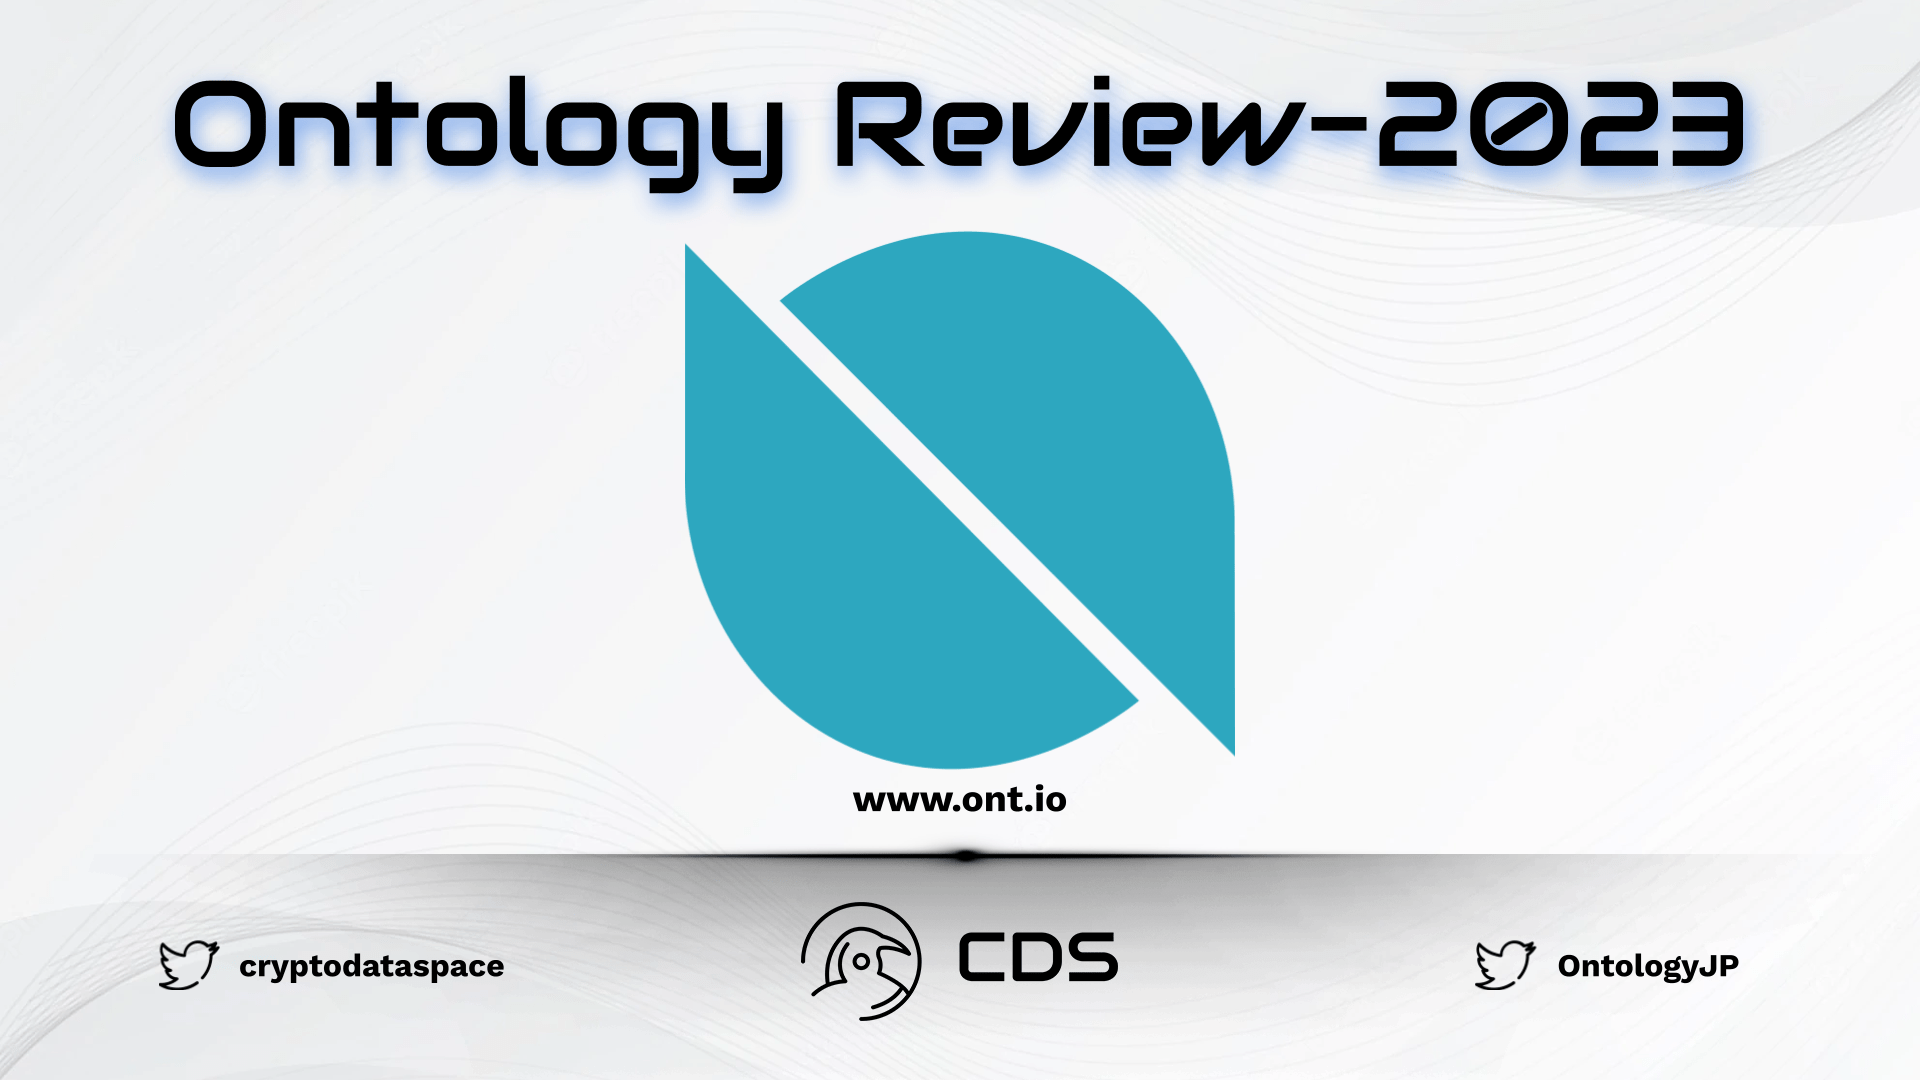 Ontology Review-2023